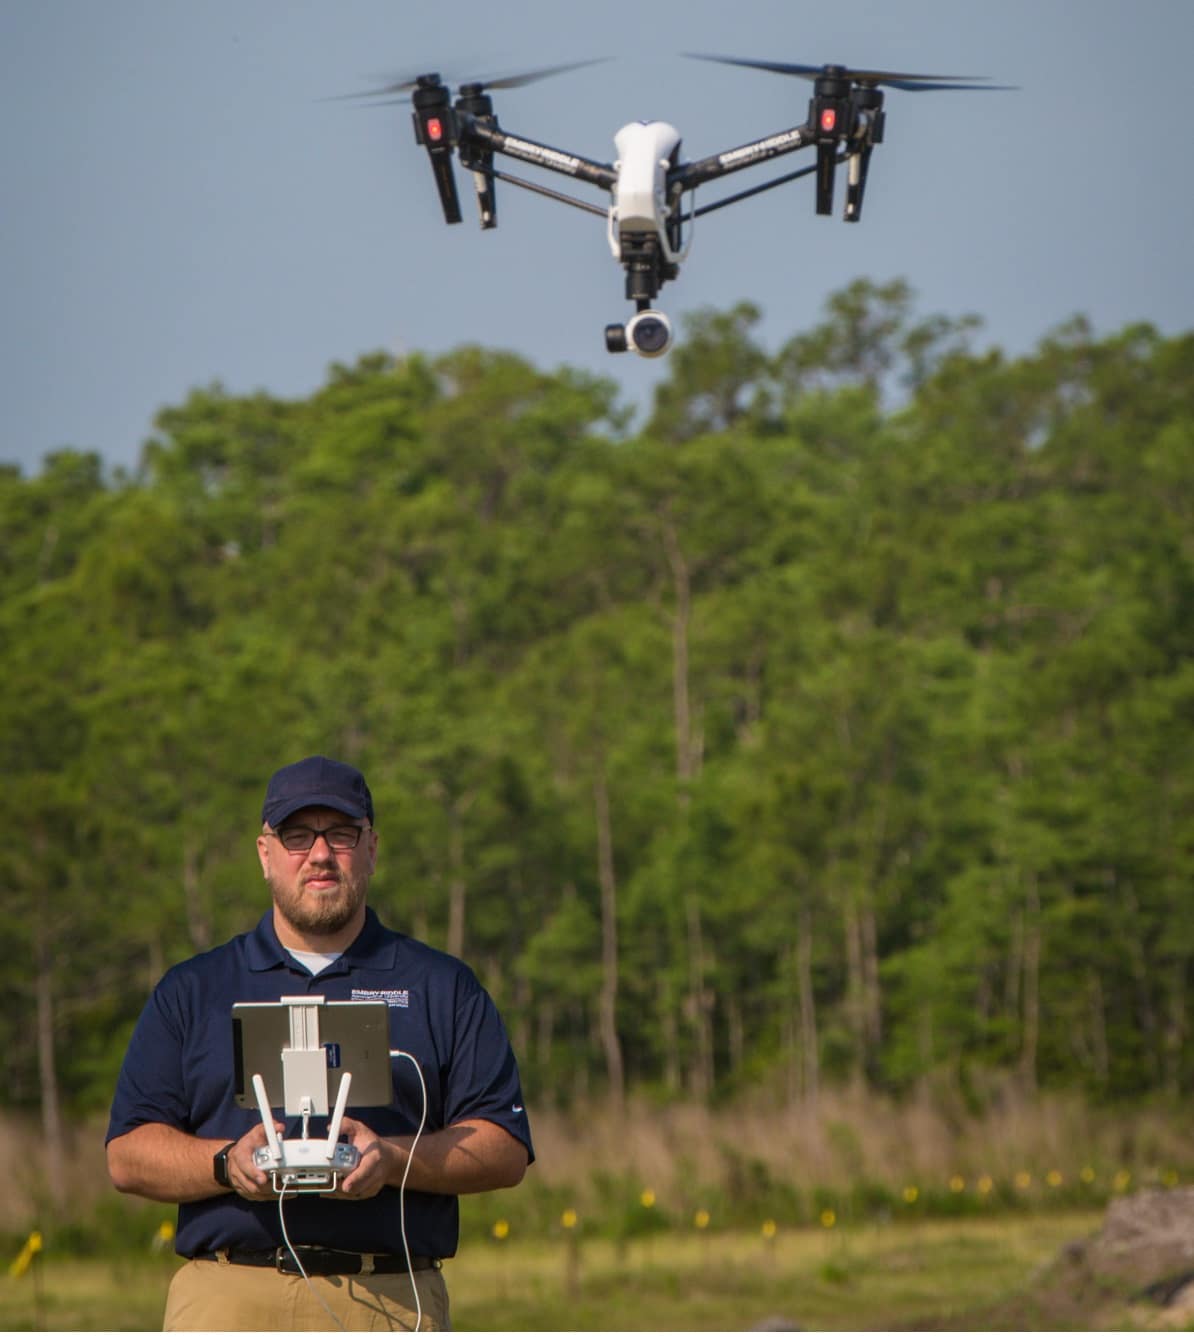 Brent Terwilliger's expertise will help define best practices for the safe, responsible operation of future unmanned aerial systems.